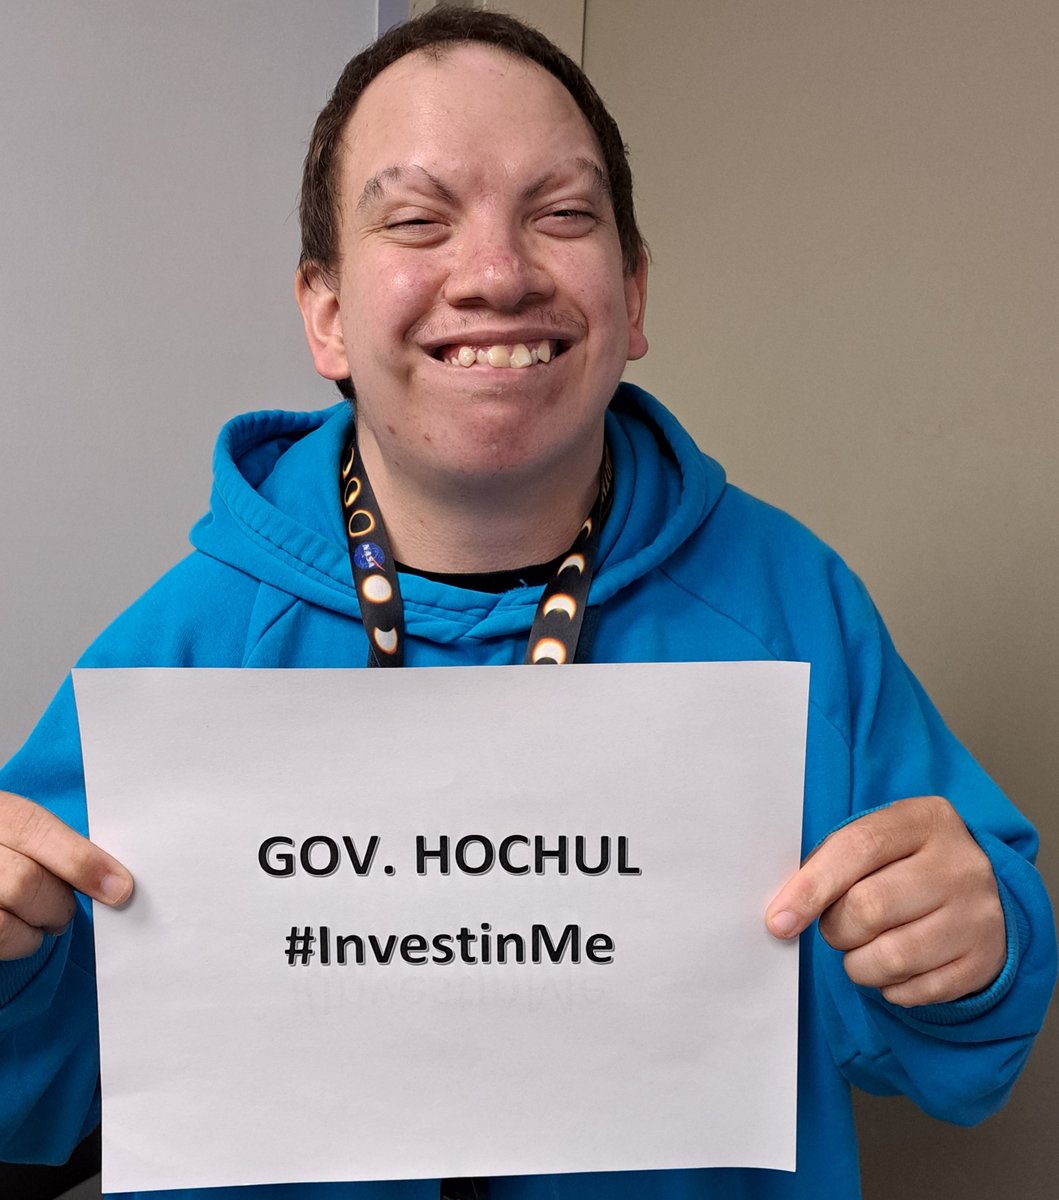 Self-advocates want NYS lawmakers to include money for a Direct Support Wage Enhancement (DSWE) in the Budget. The DSWE is essential to recruit and retain the staff who support people with disabilities. #InvestInME

@GovKathyHochul @AndreaSCousins @CarlHeastie @NYDisabilityAdv